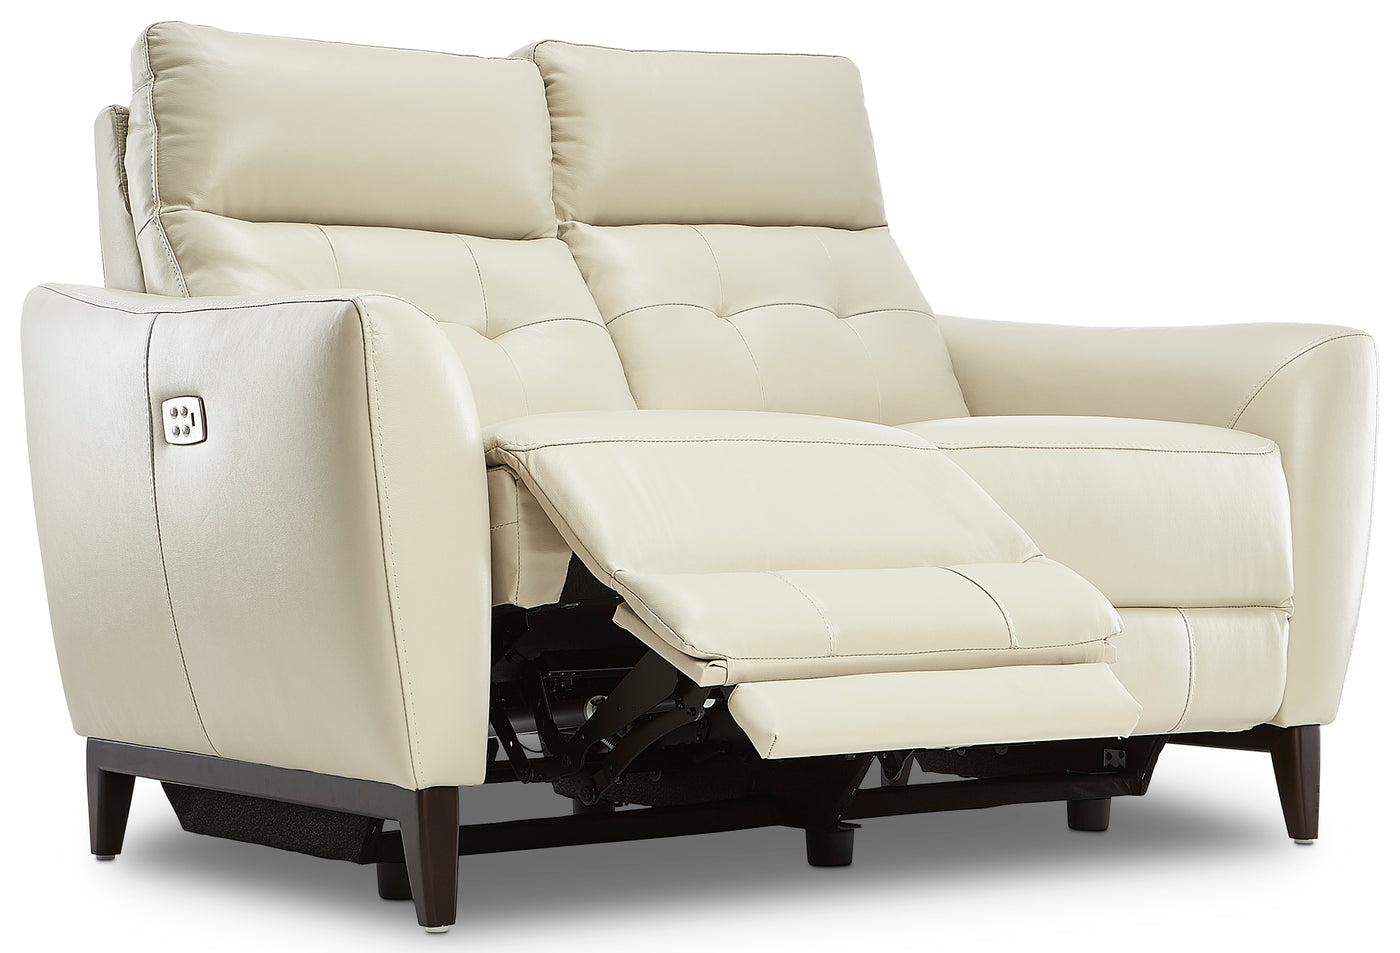 Wexner Leather Dual Power Reclining Sofa and Loveseat Set - Colby Stone